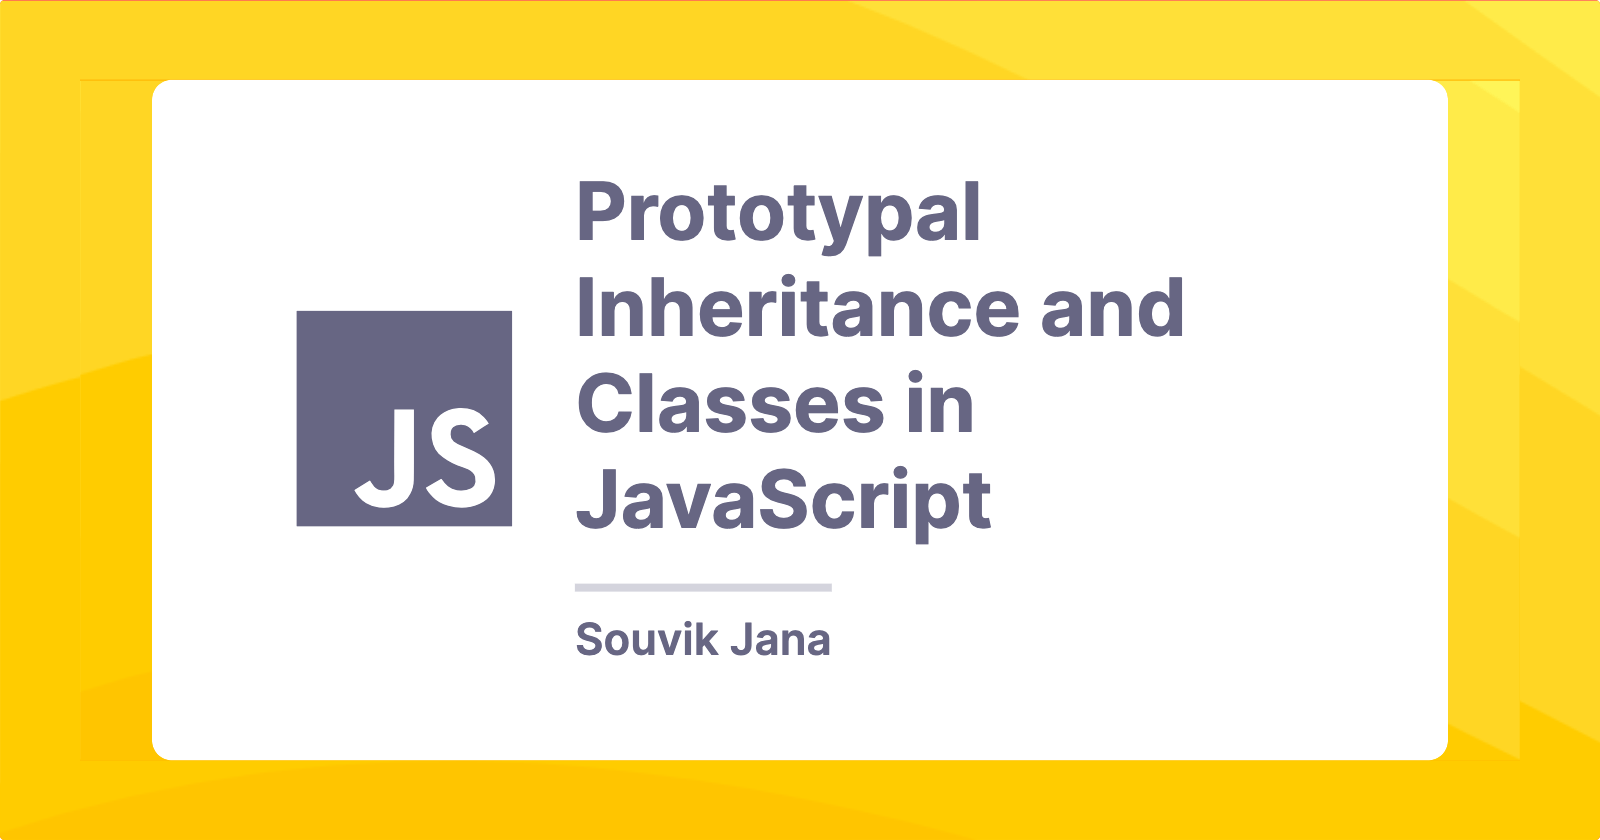 Prototypal Inheritance and Classes in JavaScript